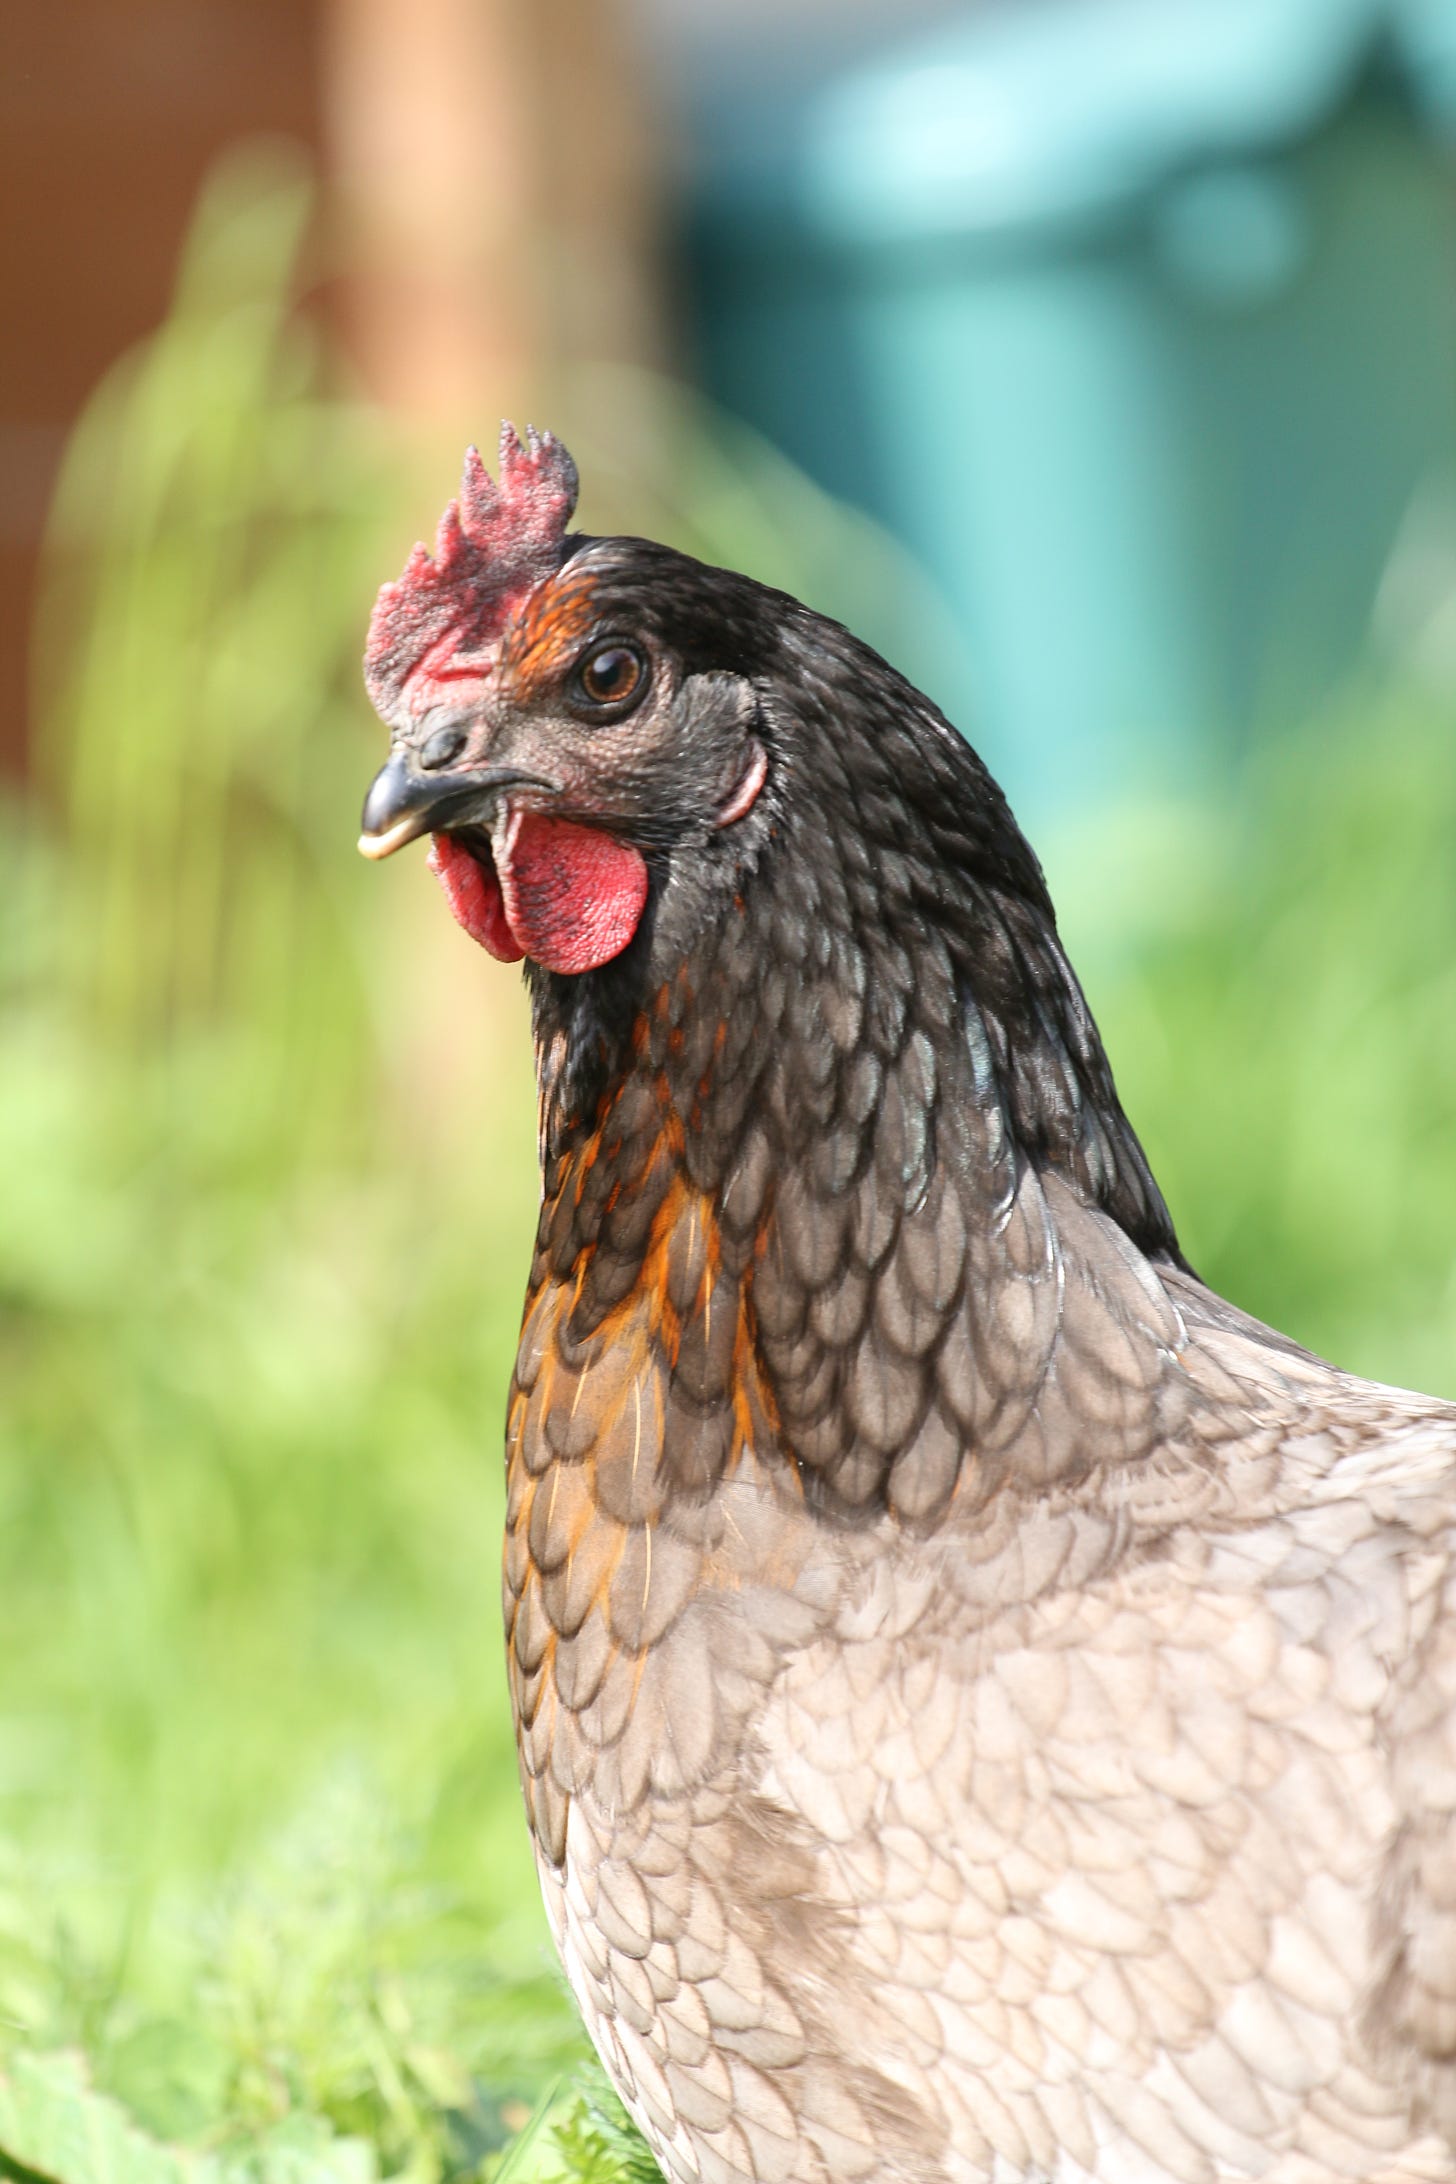 Photograph of a regal-looking black and grey hen.